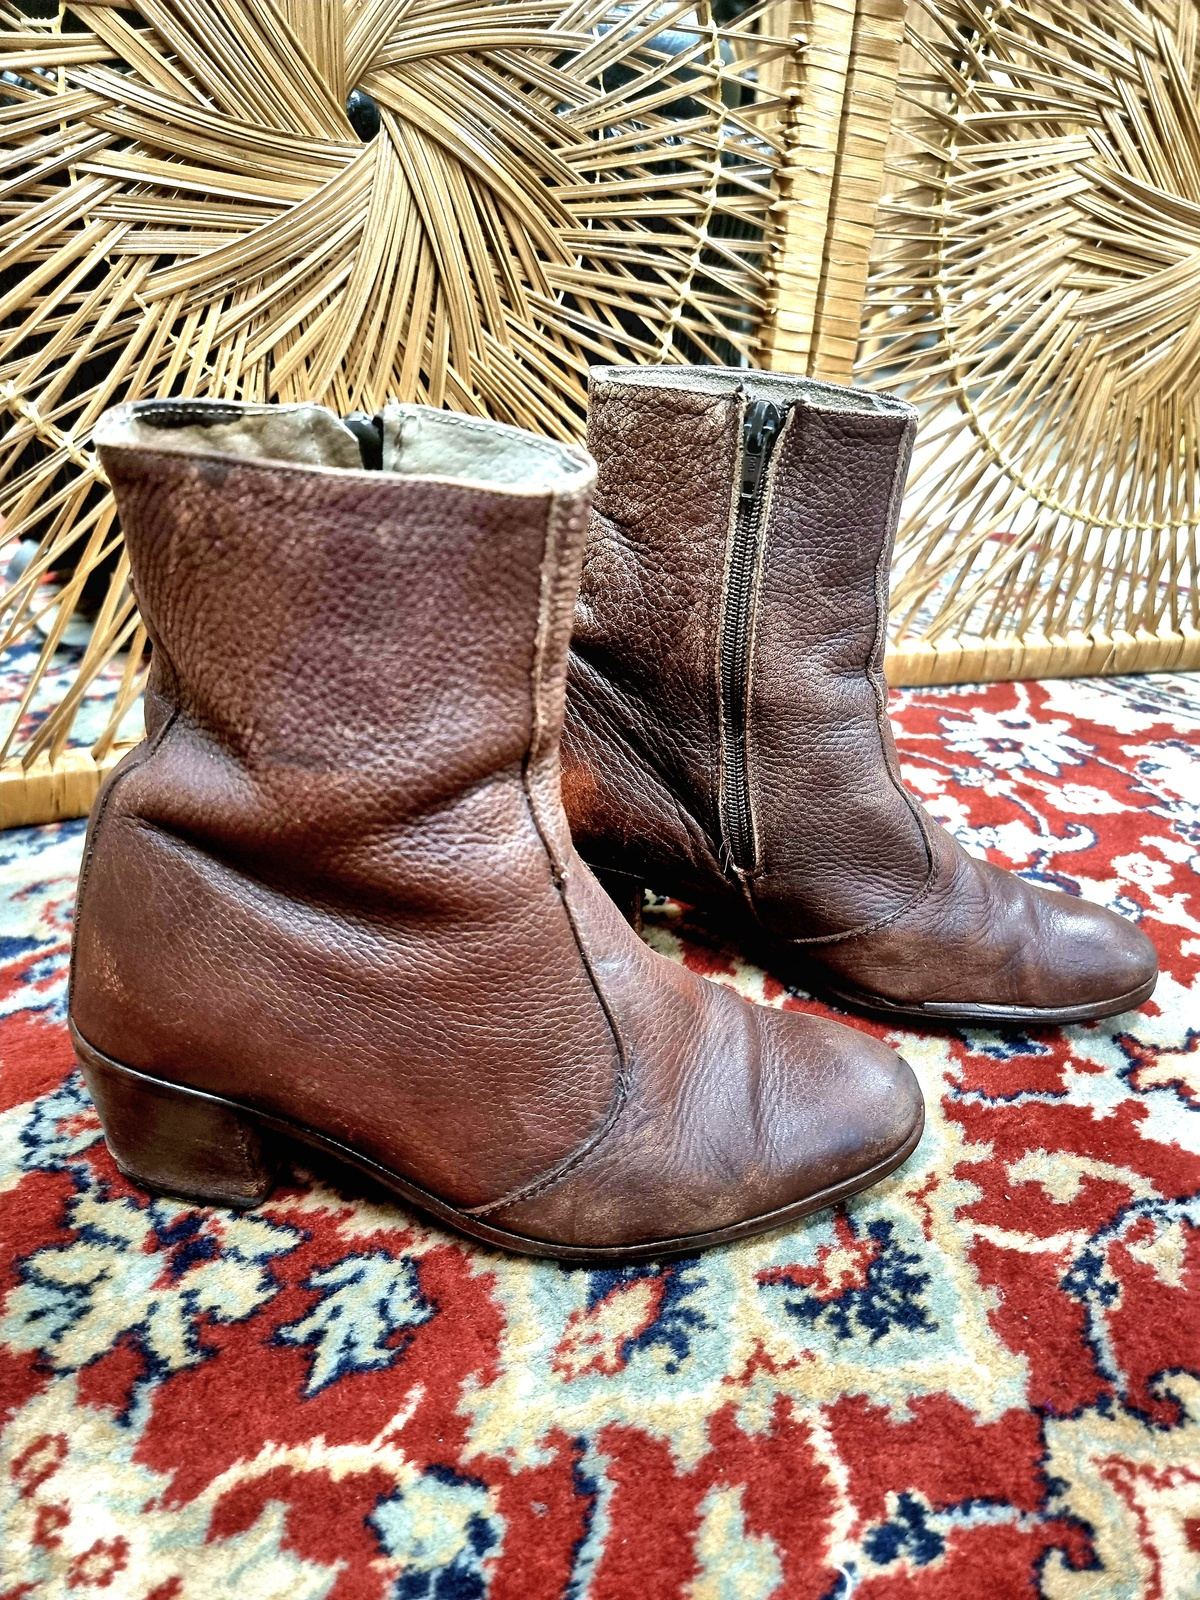 Vintage Ankle Boots